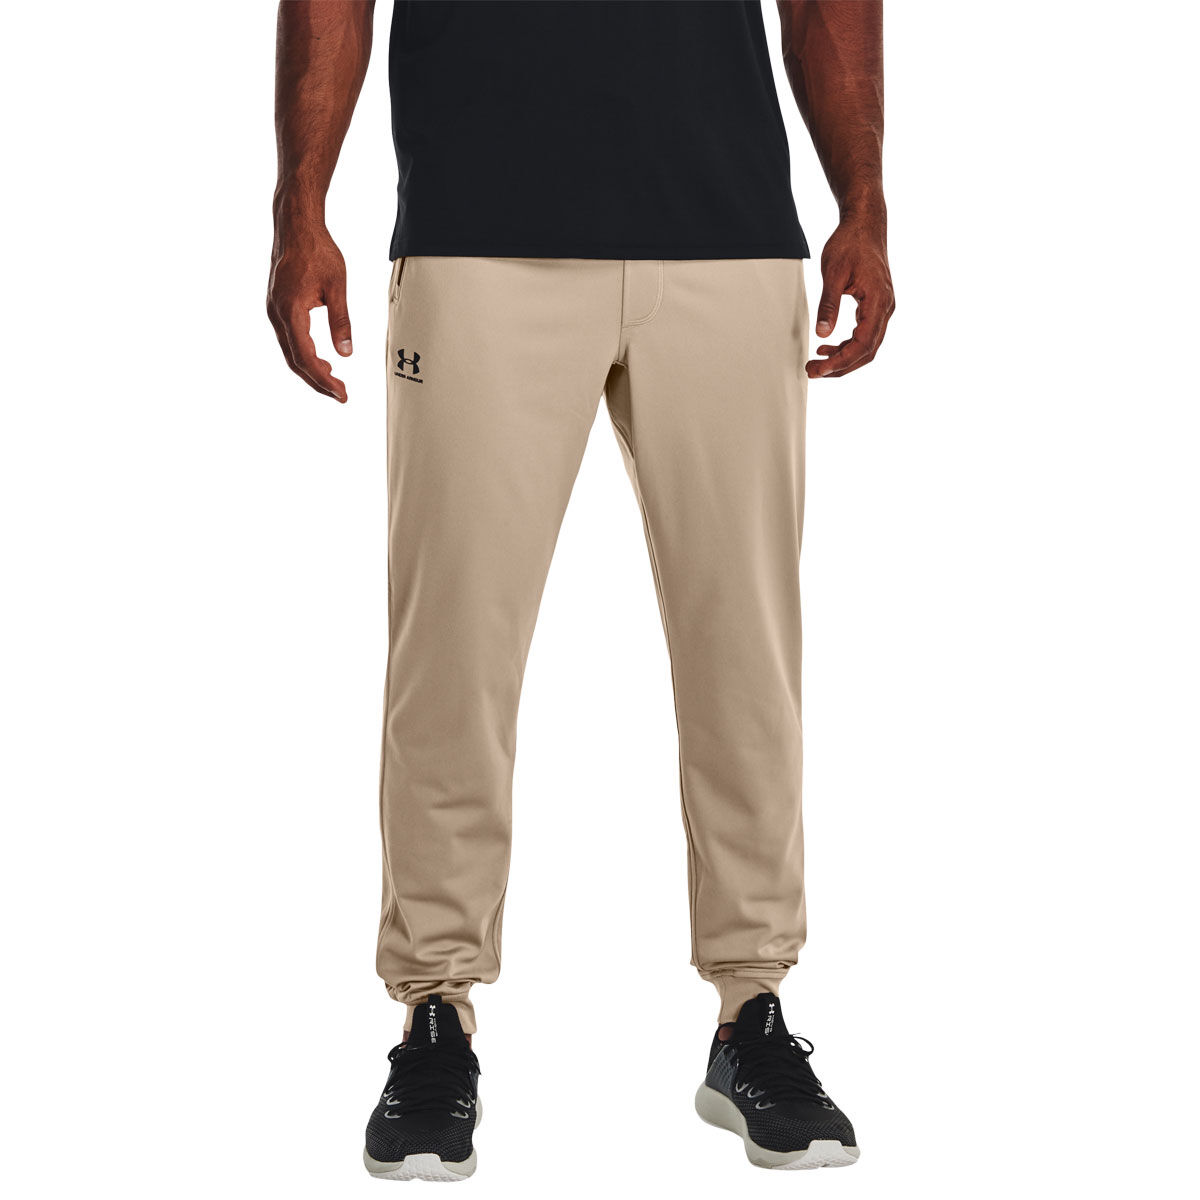 Buy Under Armour Sportstyle Tricot Black Joggers from the Next UK